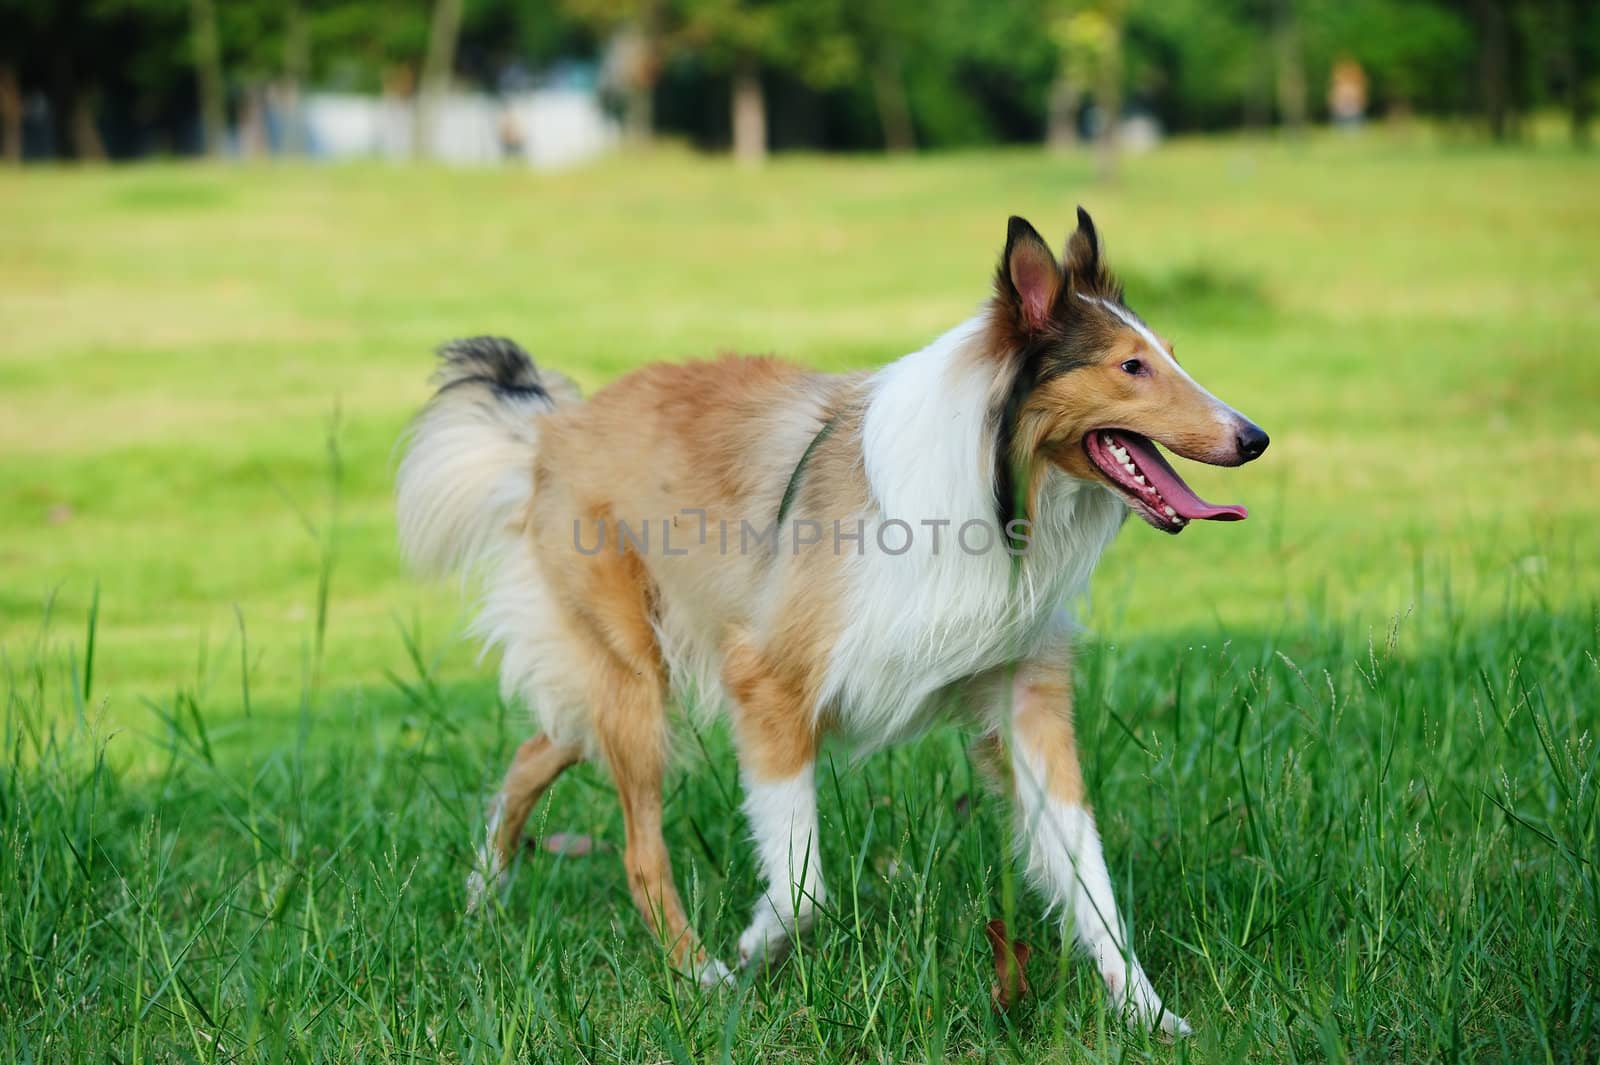 Collie rough dog running on the lawn